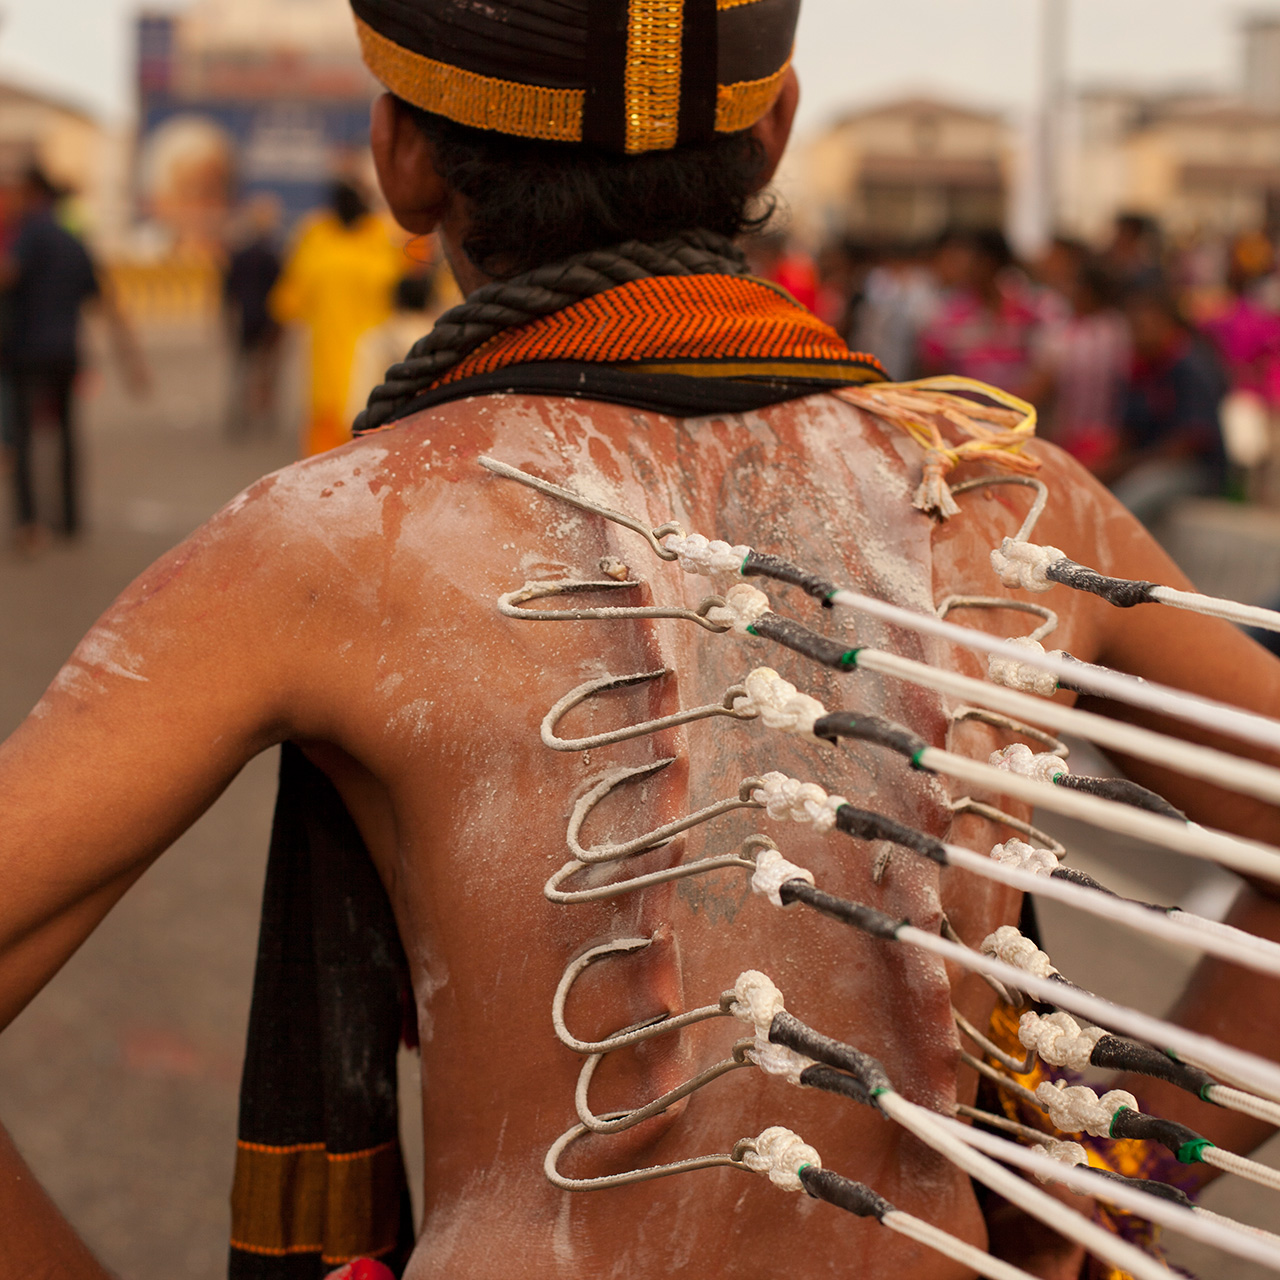 Thaipussam hooks by Carlos Escolástico